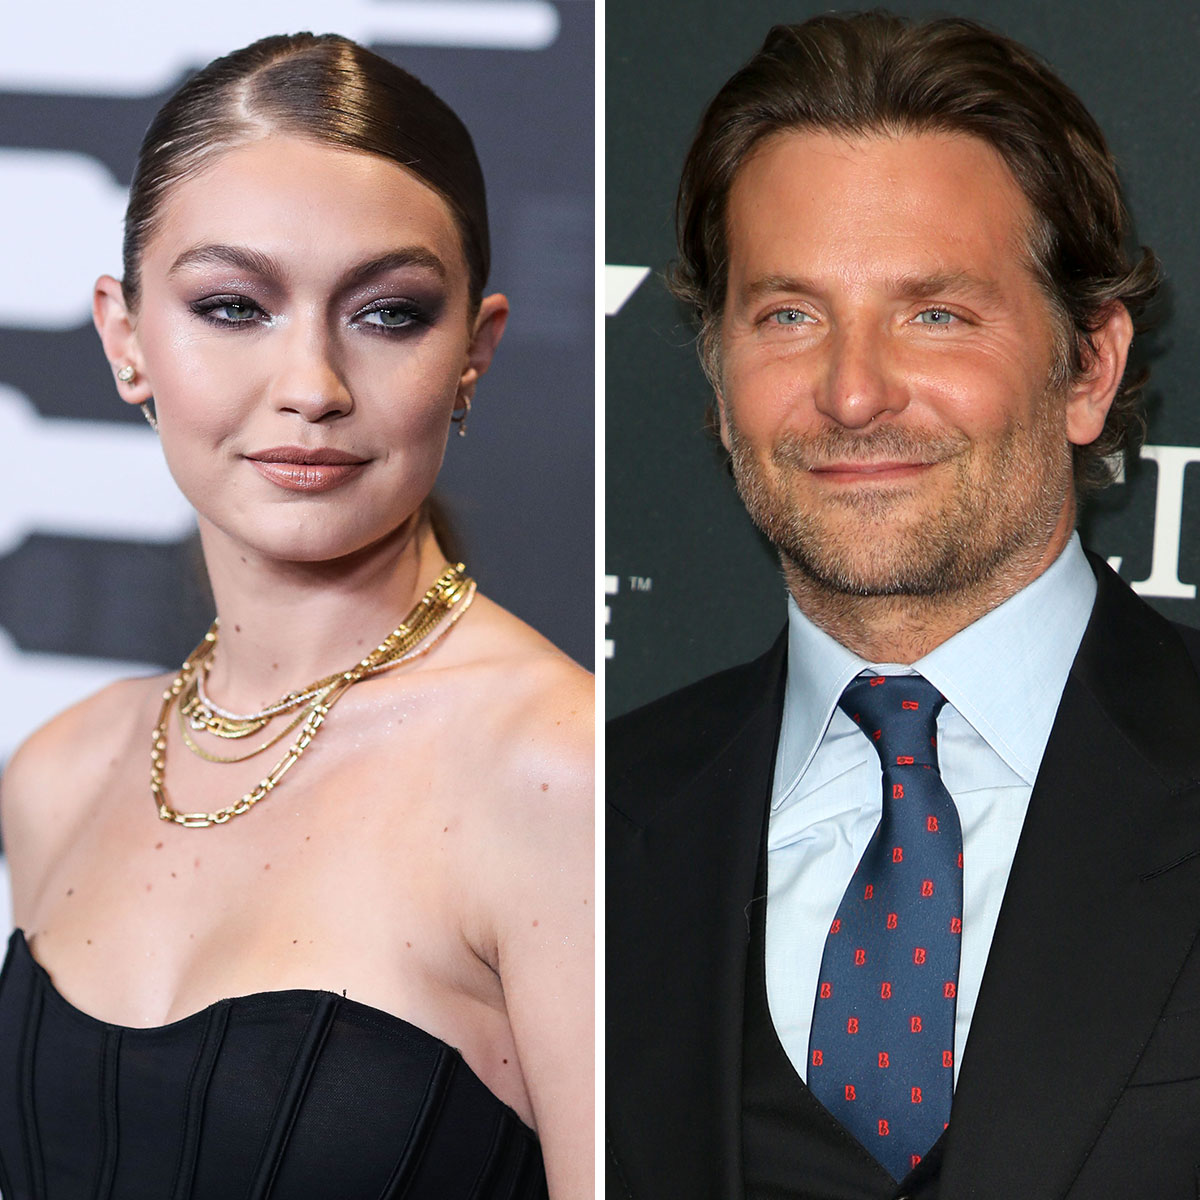 Gigi Hadid And Rumored New Boyfriend Bradley Cooper Were Just Spotted  Together In NYC After Weekend Getaway - SHEfinds